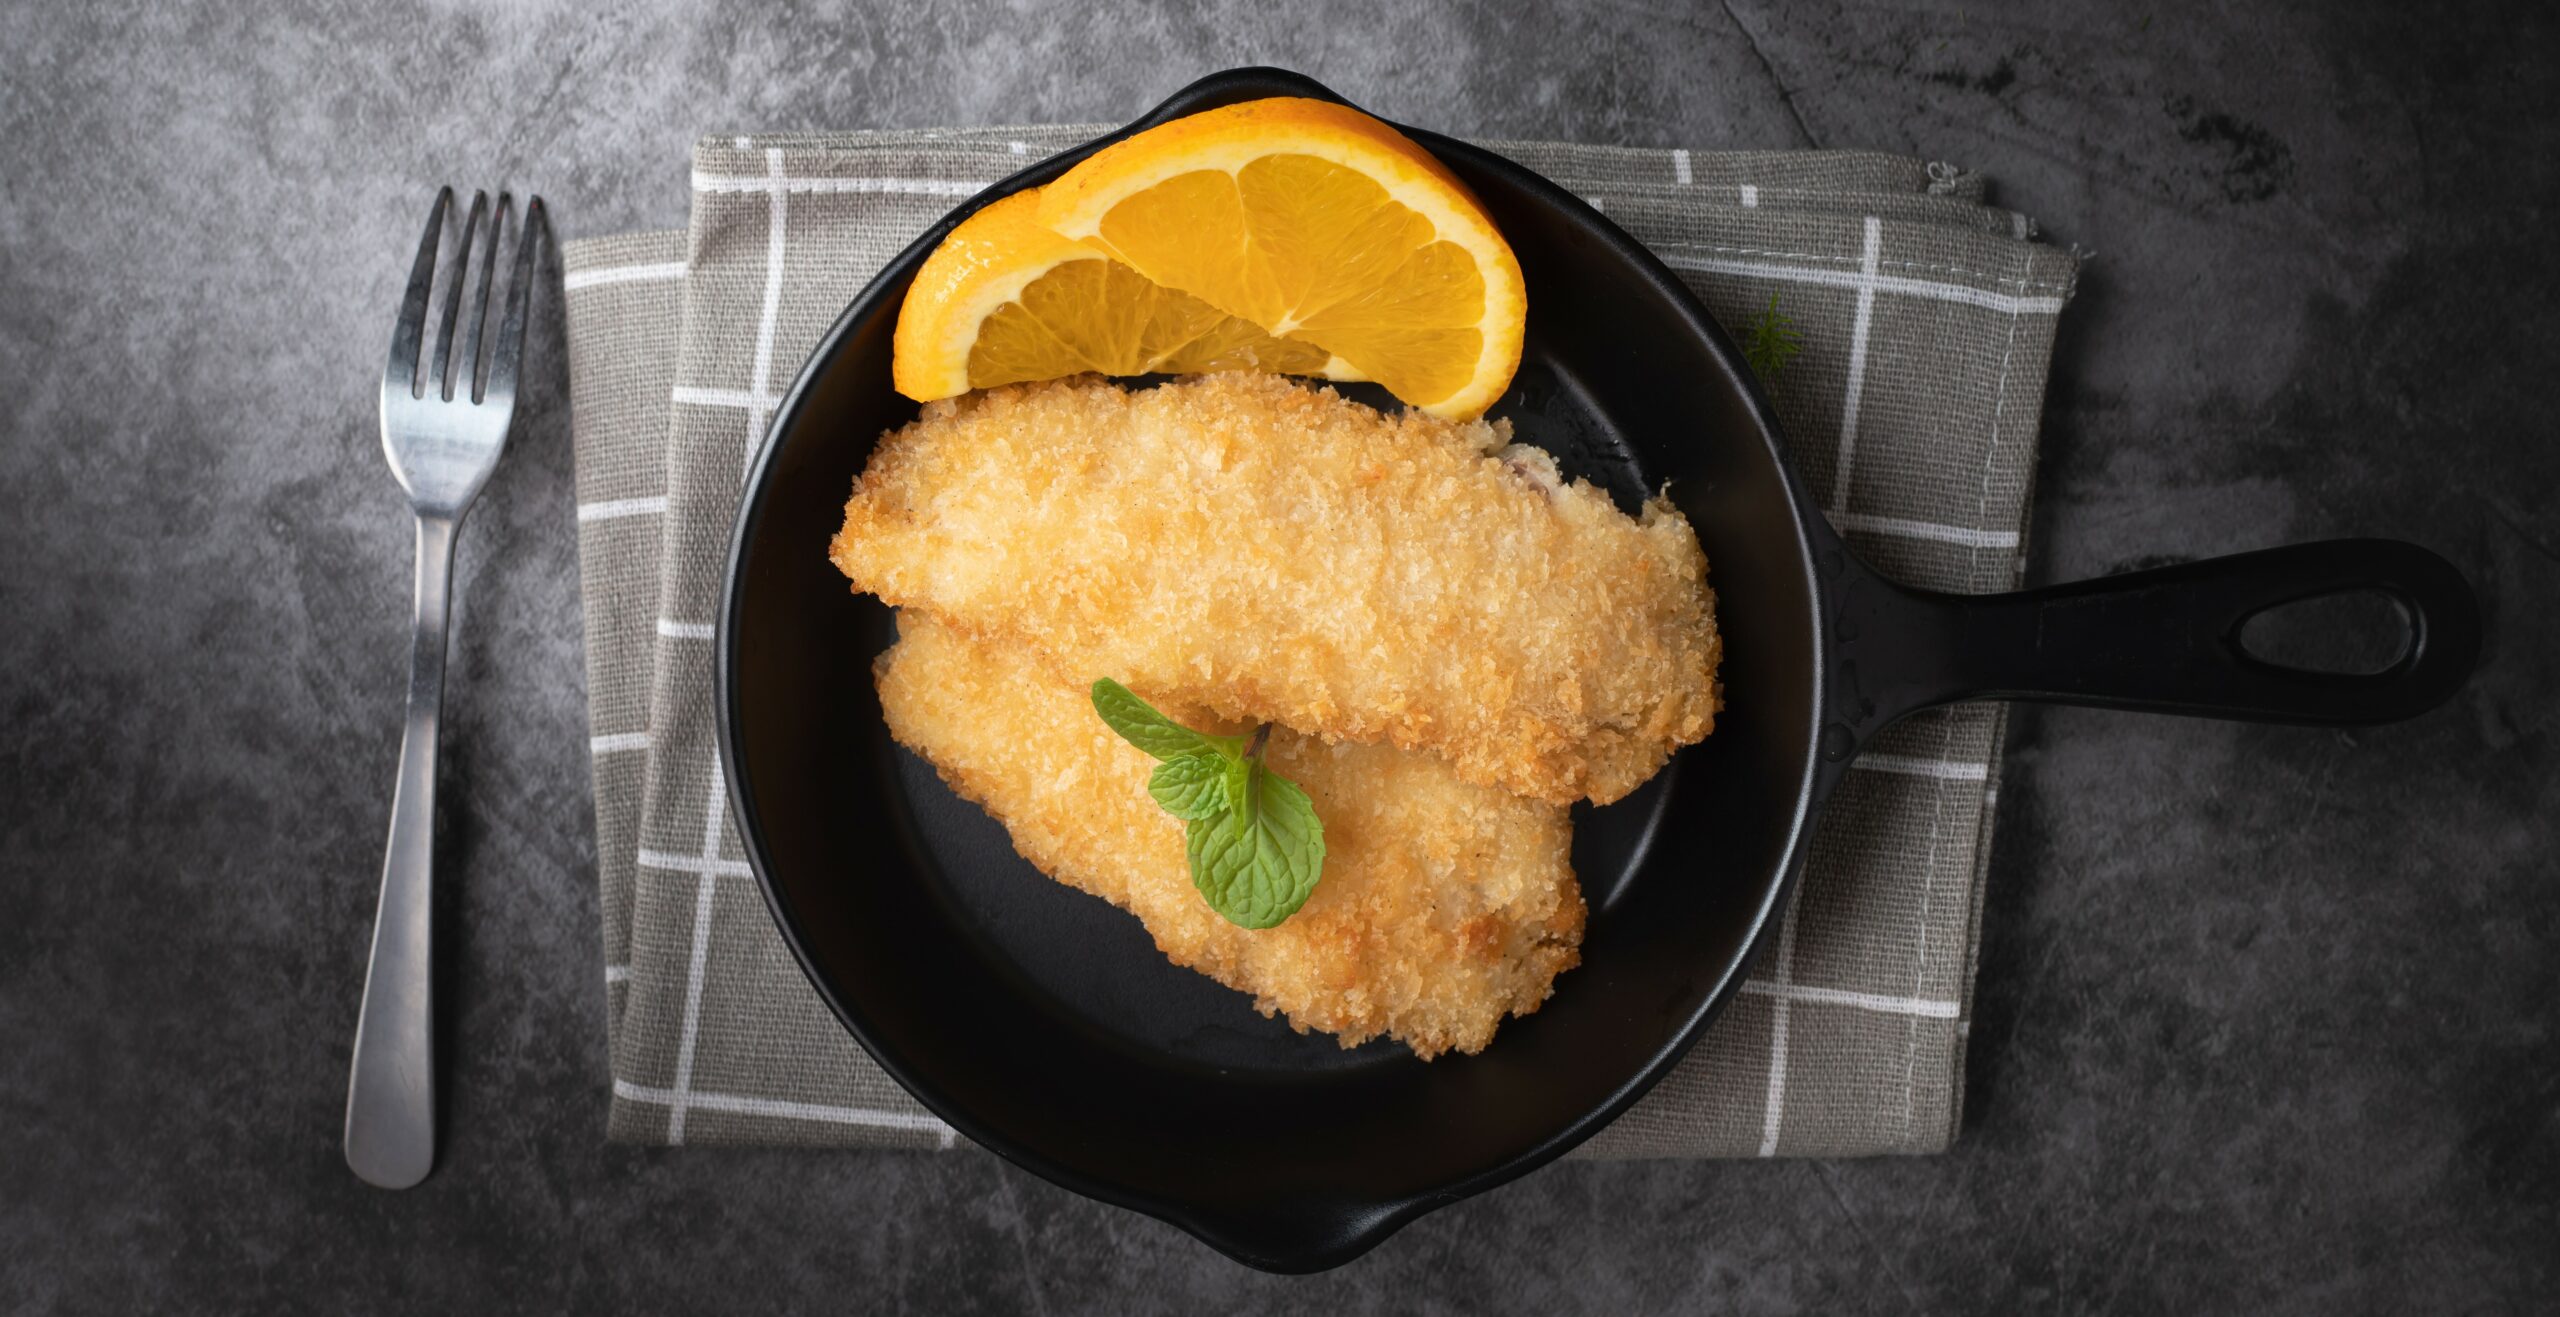 fried fish with lemon on kitchen table.